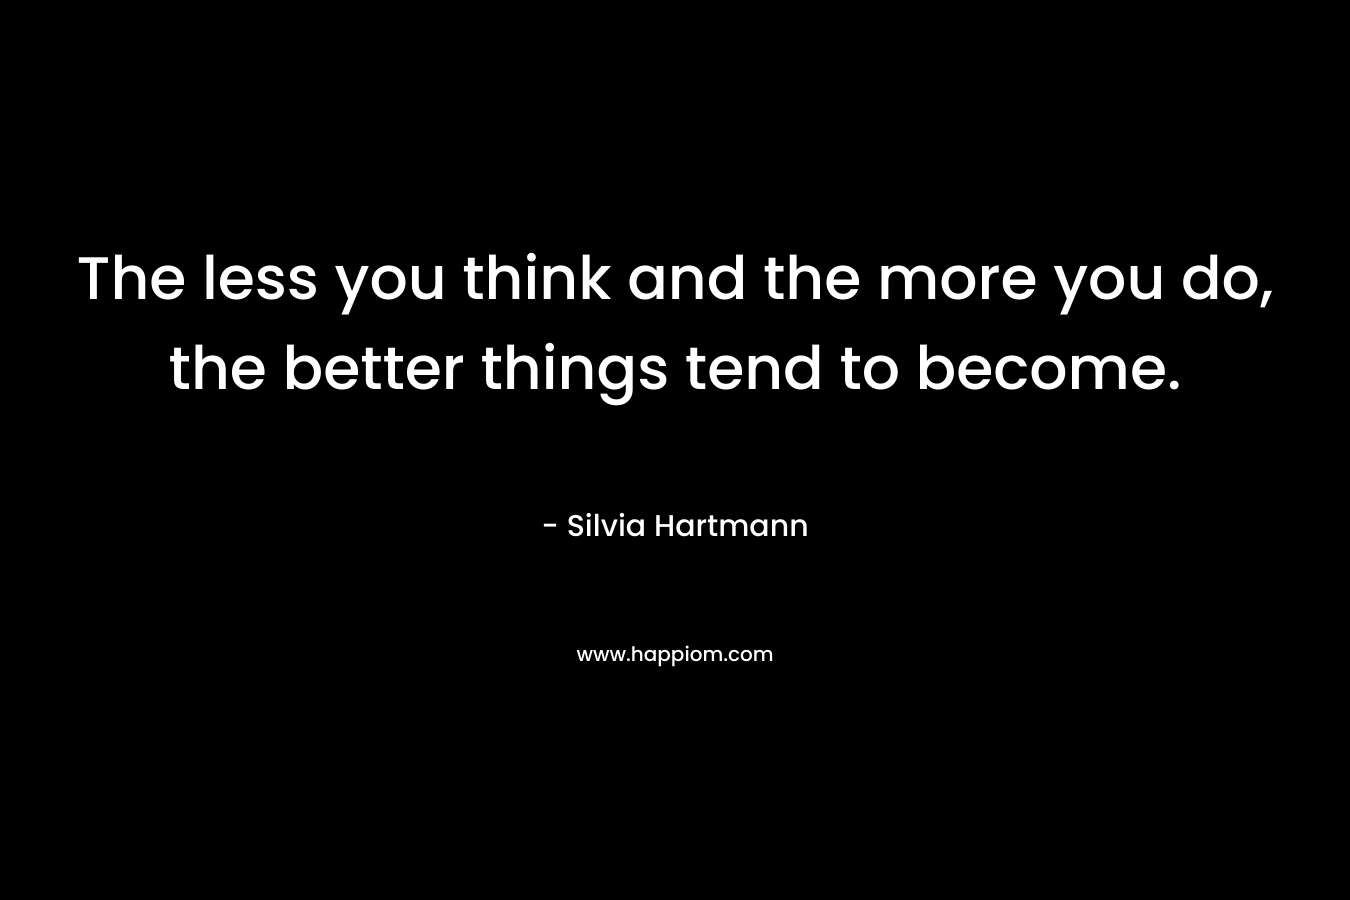 The less you think and the more you do, the better things tend to become. – Silvia Hartmann